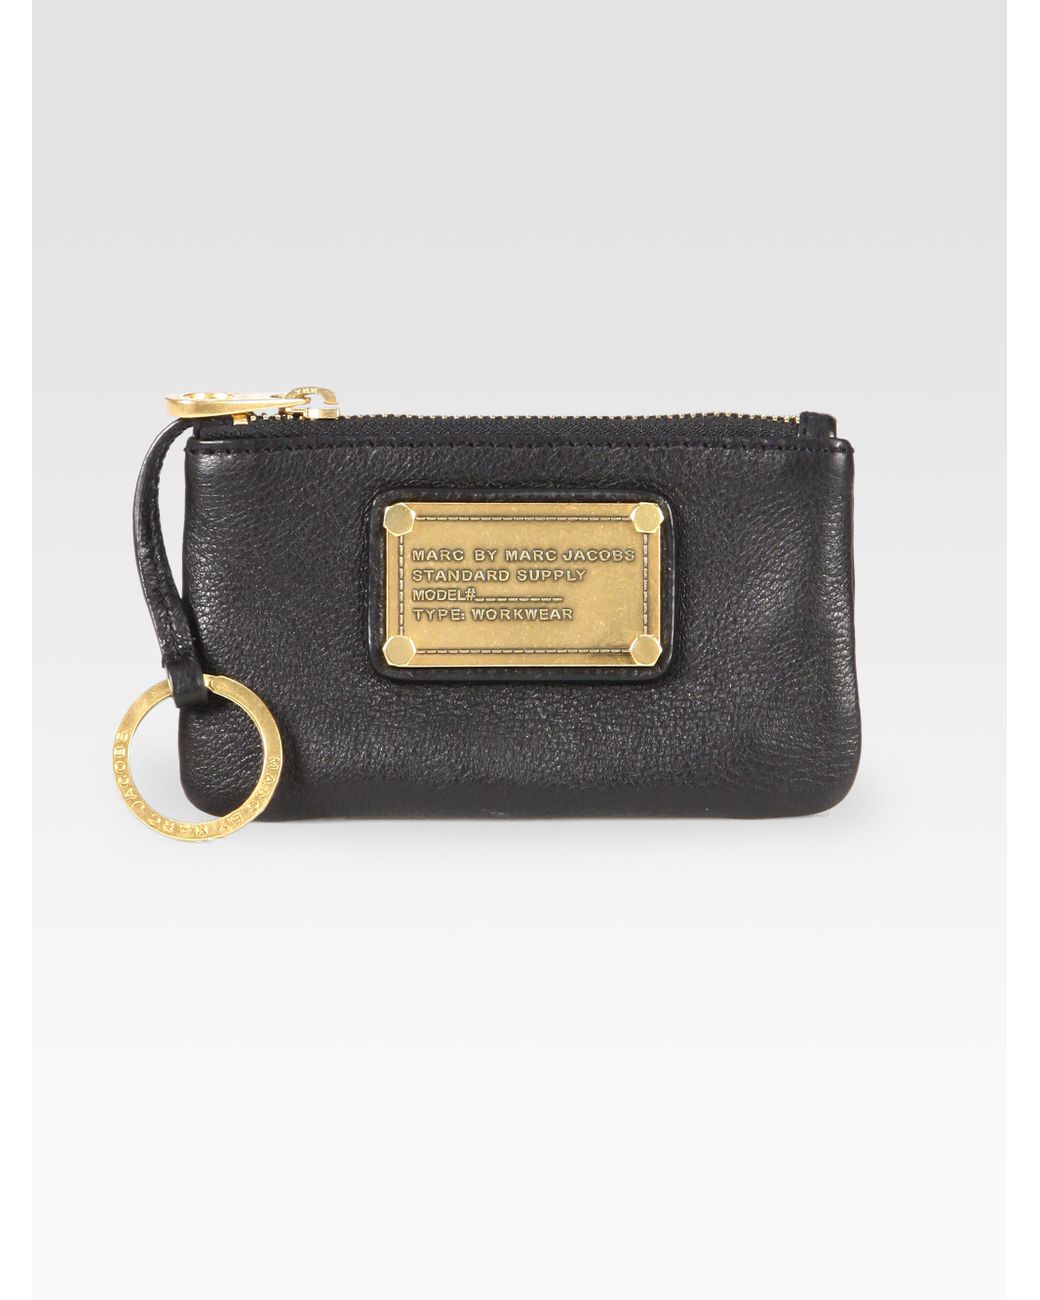 Marc By Marc Jacobs Classic Q Key Pouch in Black | Lyst